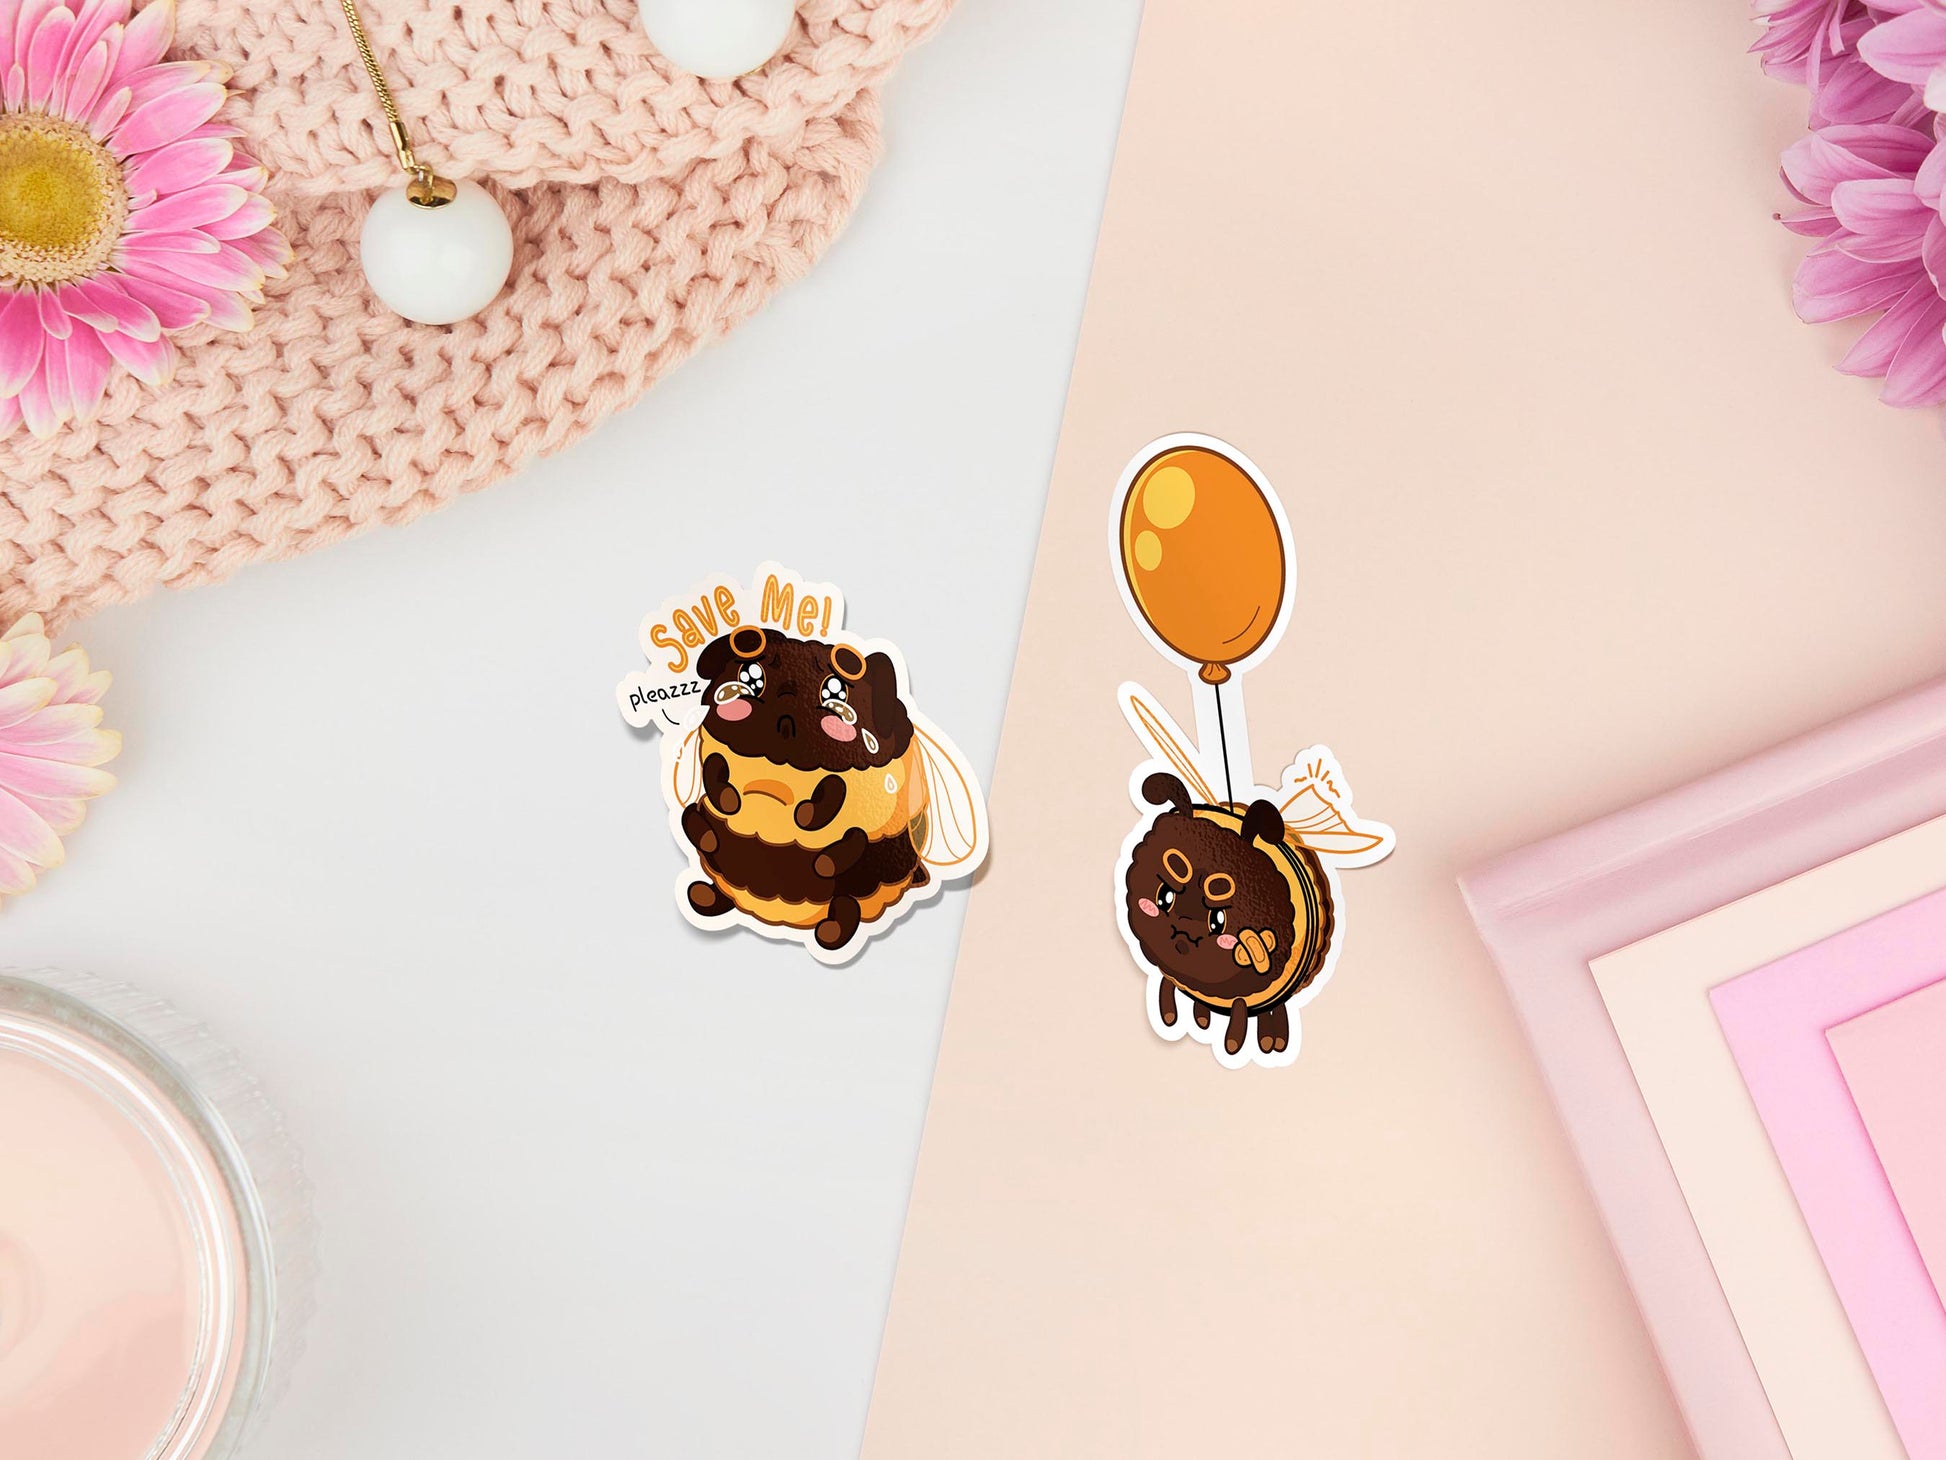 Two stickers of digital illustrated cartoon one is a fat bee sat down looking sad and crying with the words save me! and pleaszz. The other sticker is a sulking bee with a broken wing tied to an orange balloon.